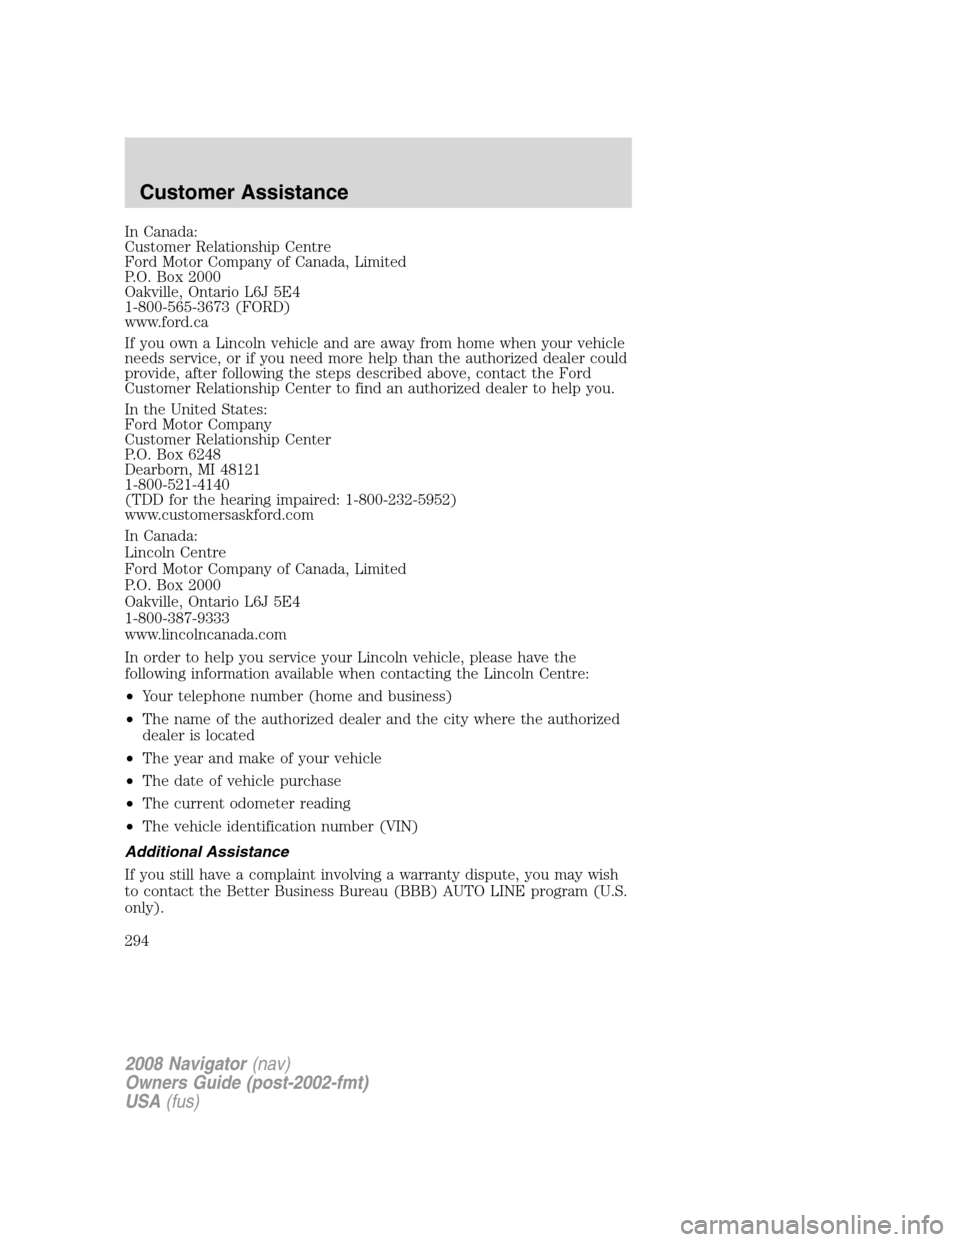 LINCOLN NAVIGATOR 2008  Owners Manual In Canada:
Customer Relationship Centre
Ford Motor Company of Canada, Limited
P.O. Box 2000
Oakville, Ontario L6J 5E4
1-800-565-3673 (FORD)
www.ford.ca
If you own a Lincoln vehicle and are away from h